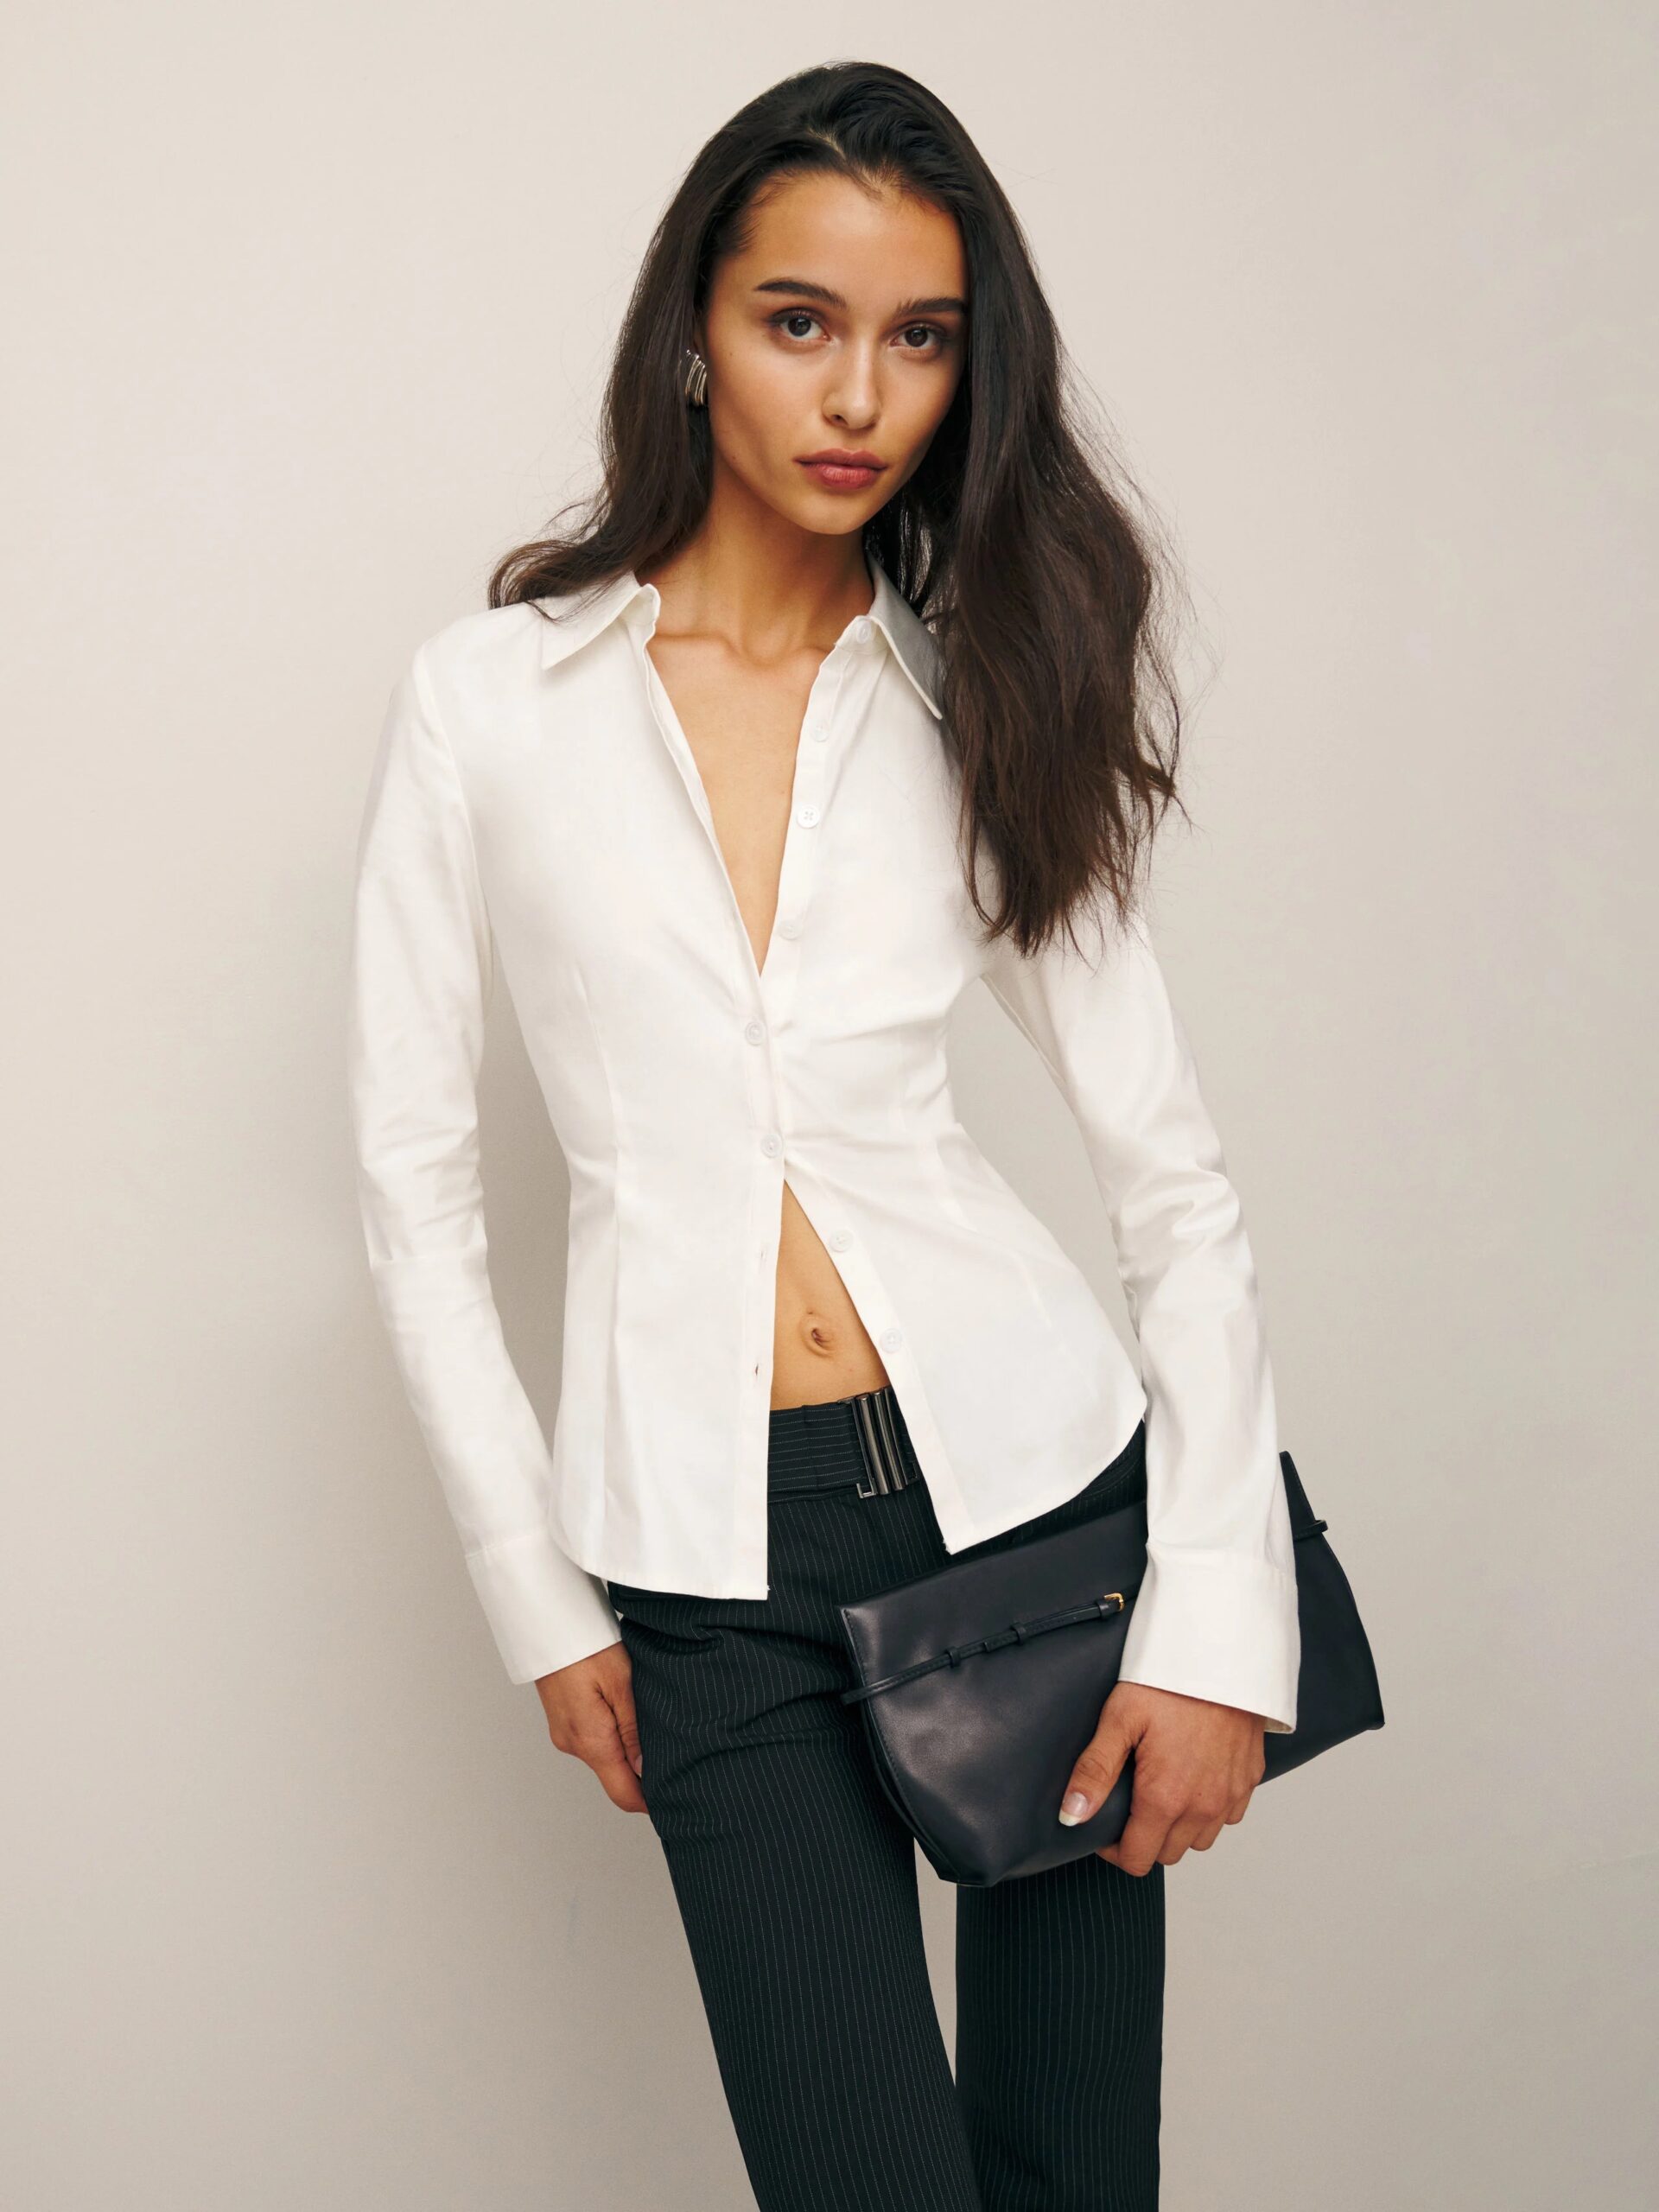 Woman posing in a white blouse and black trousers, holding a small bag.